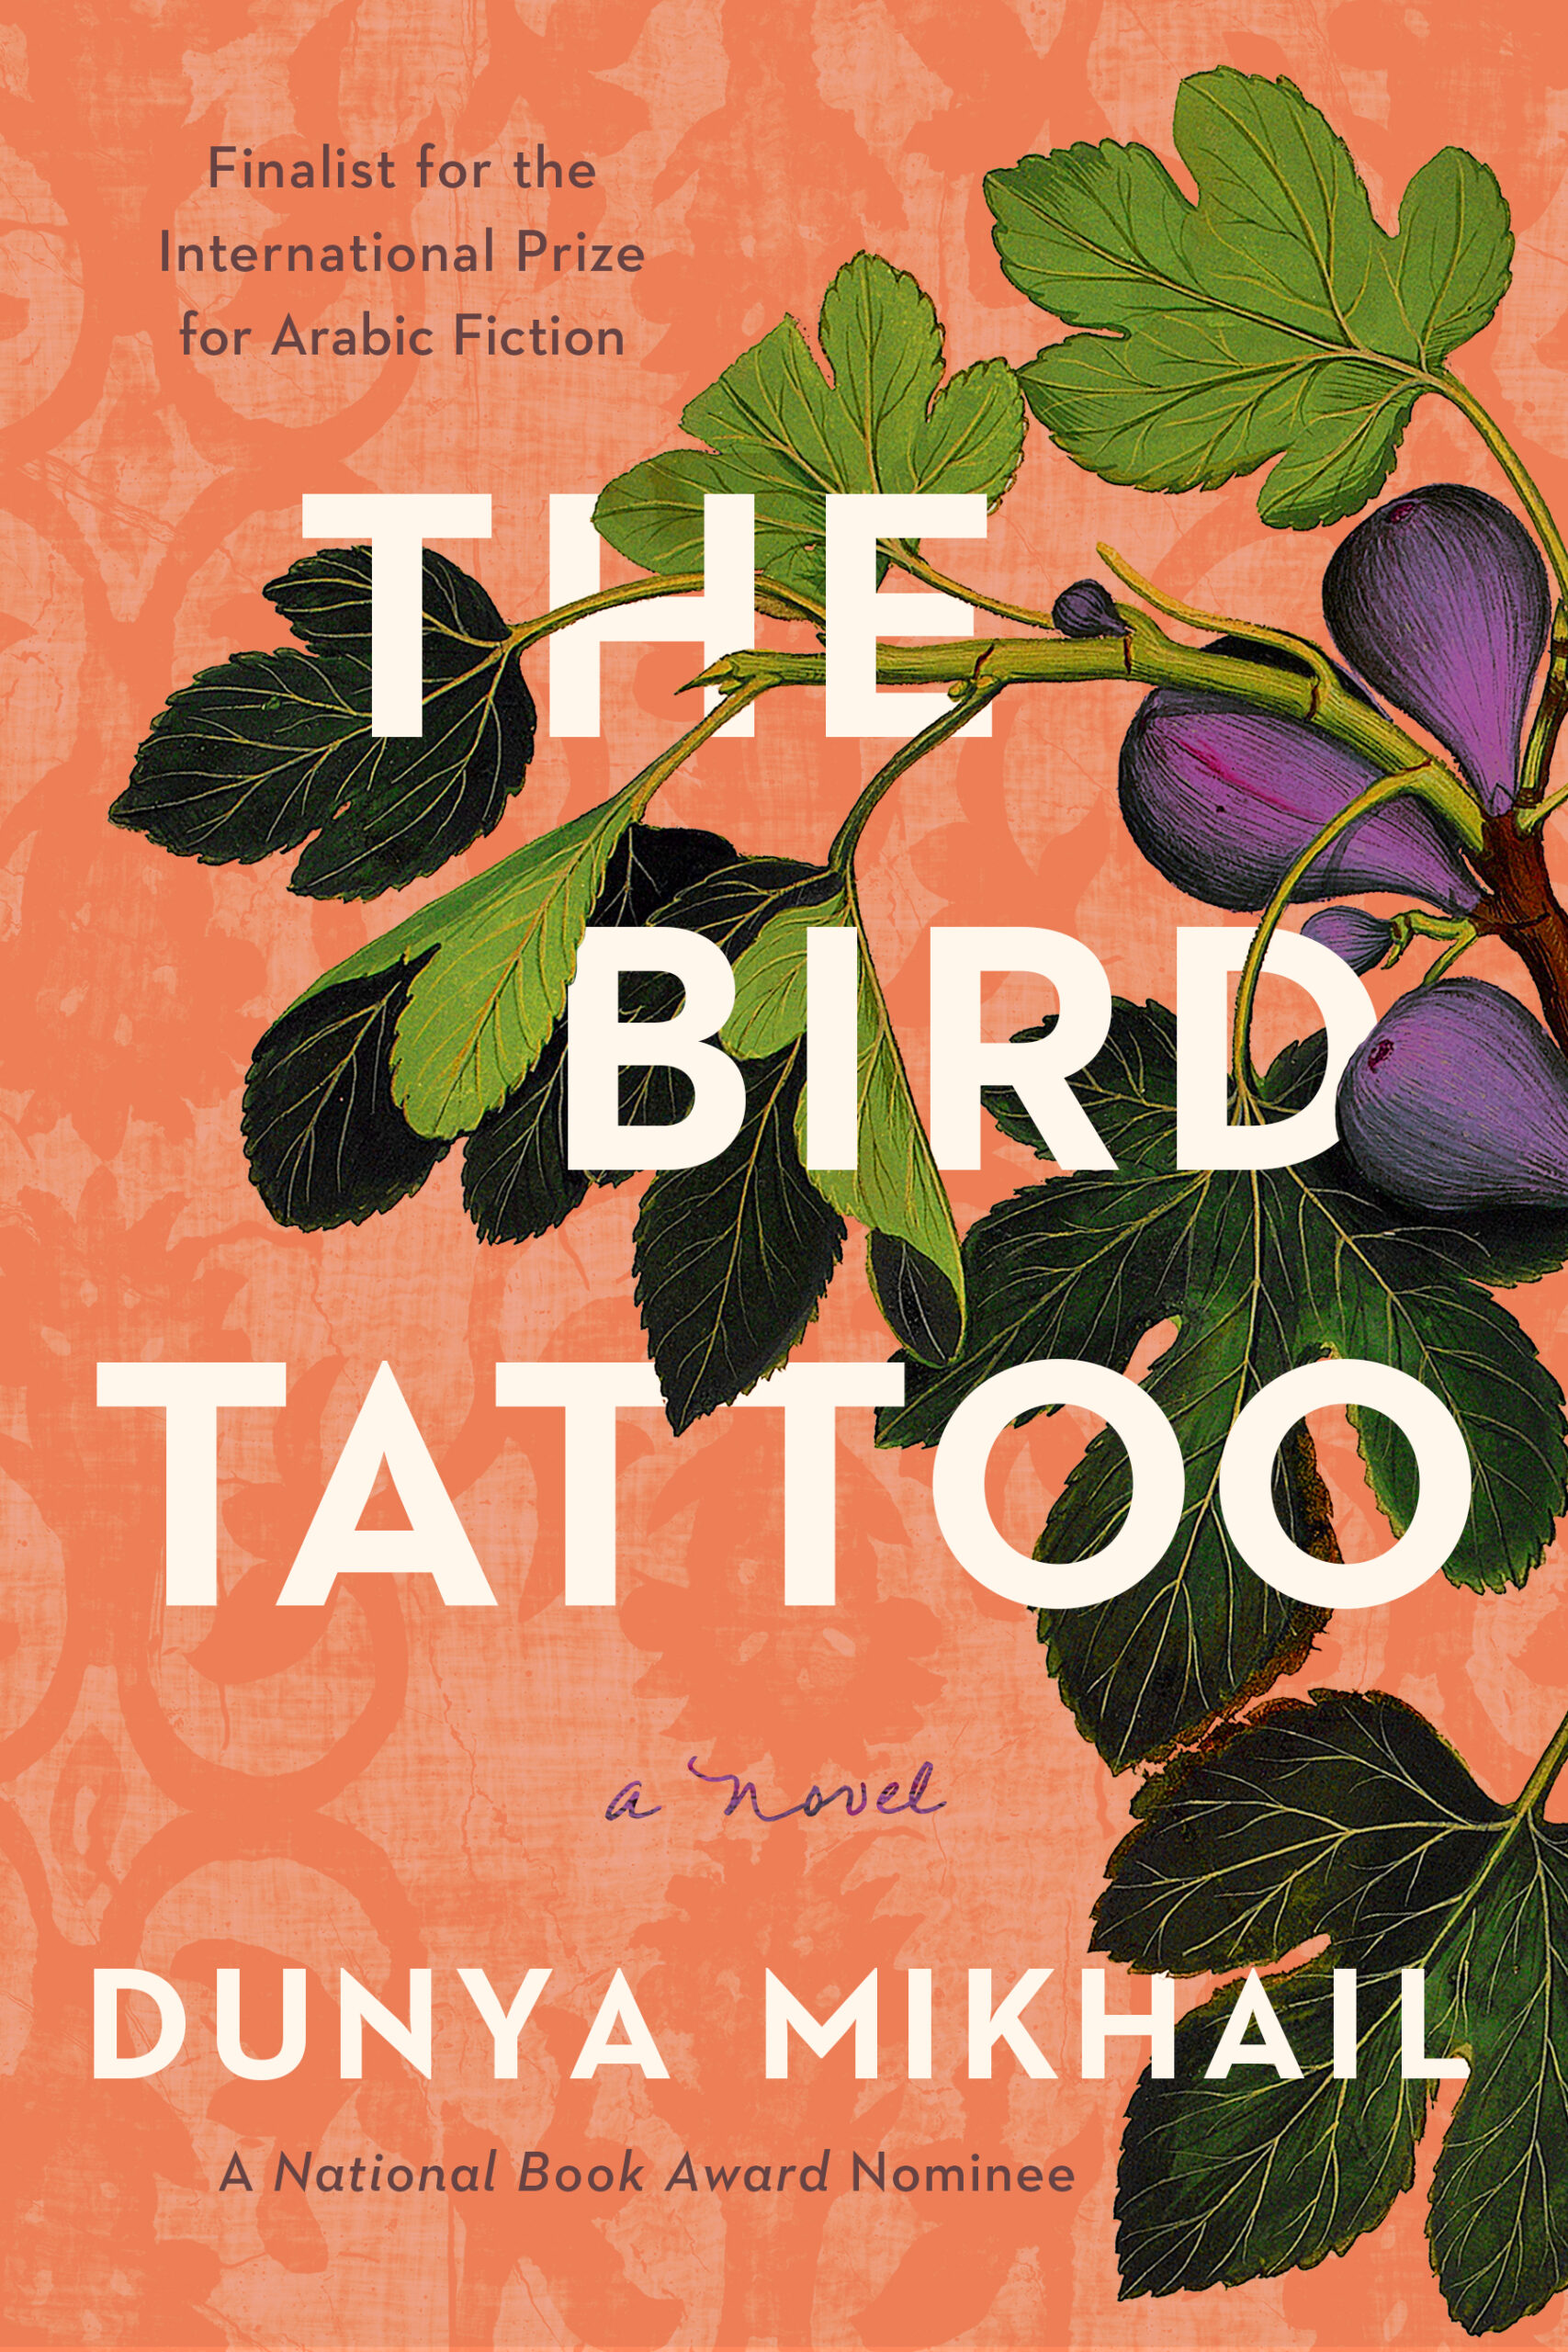 Book Cover Image of “The Bird Tattoo”